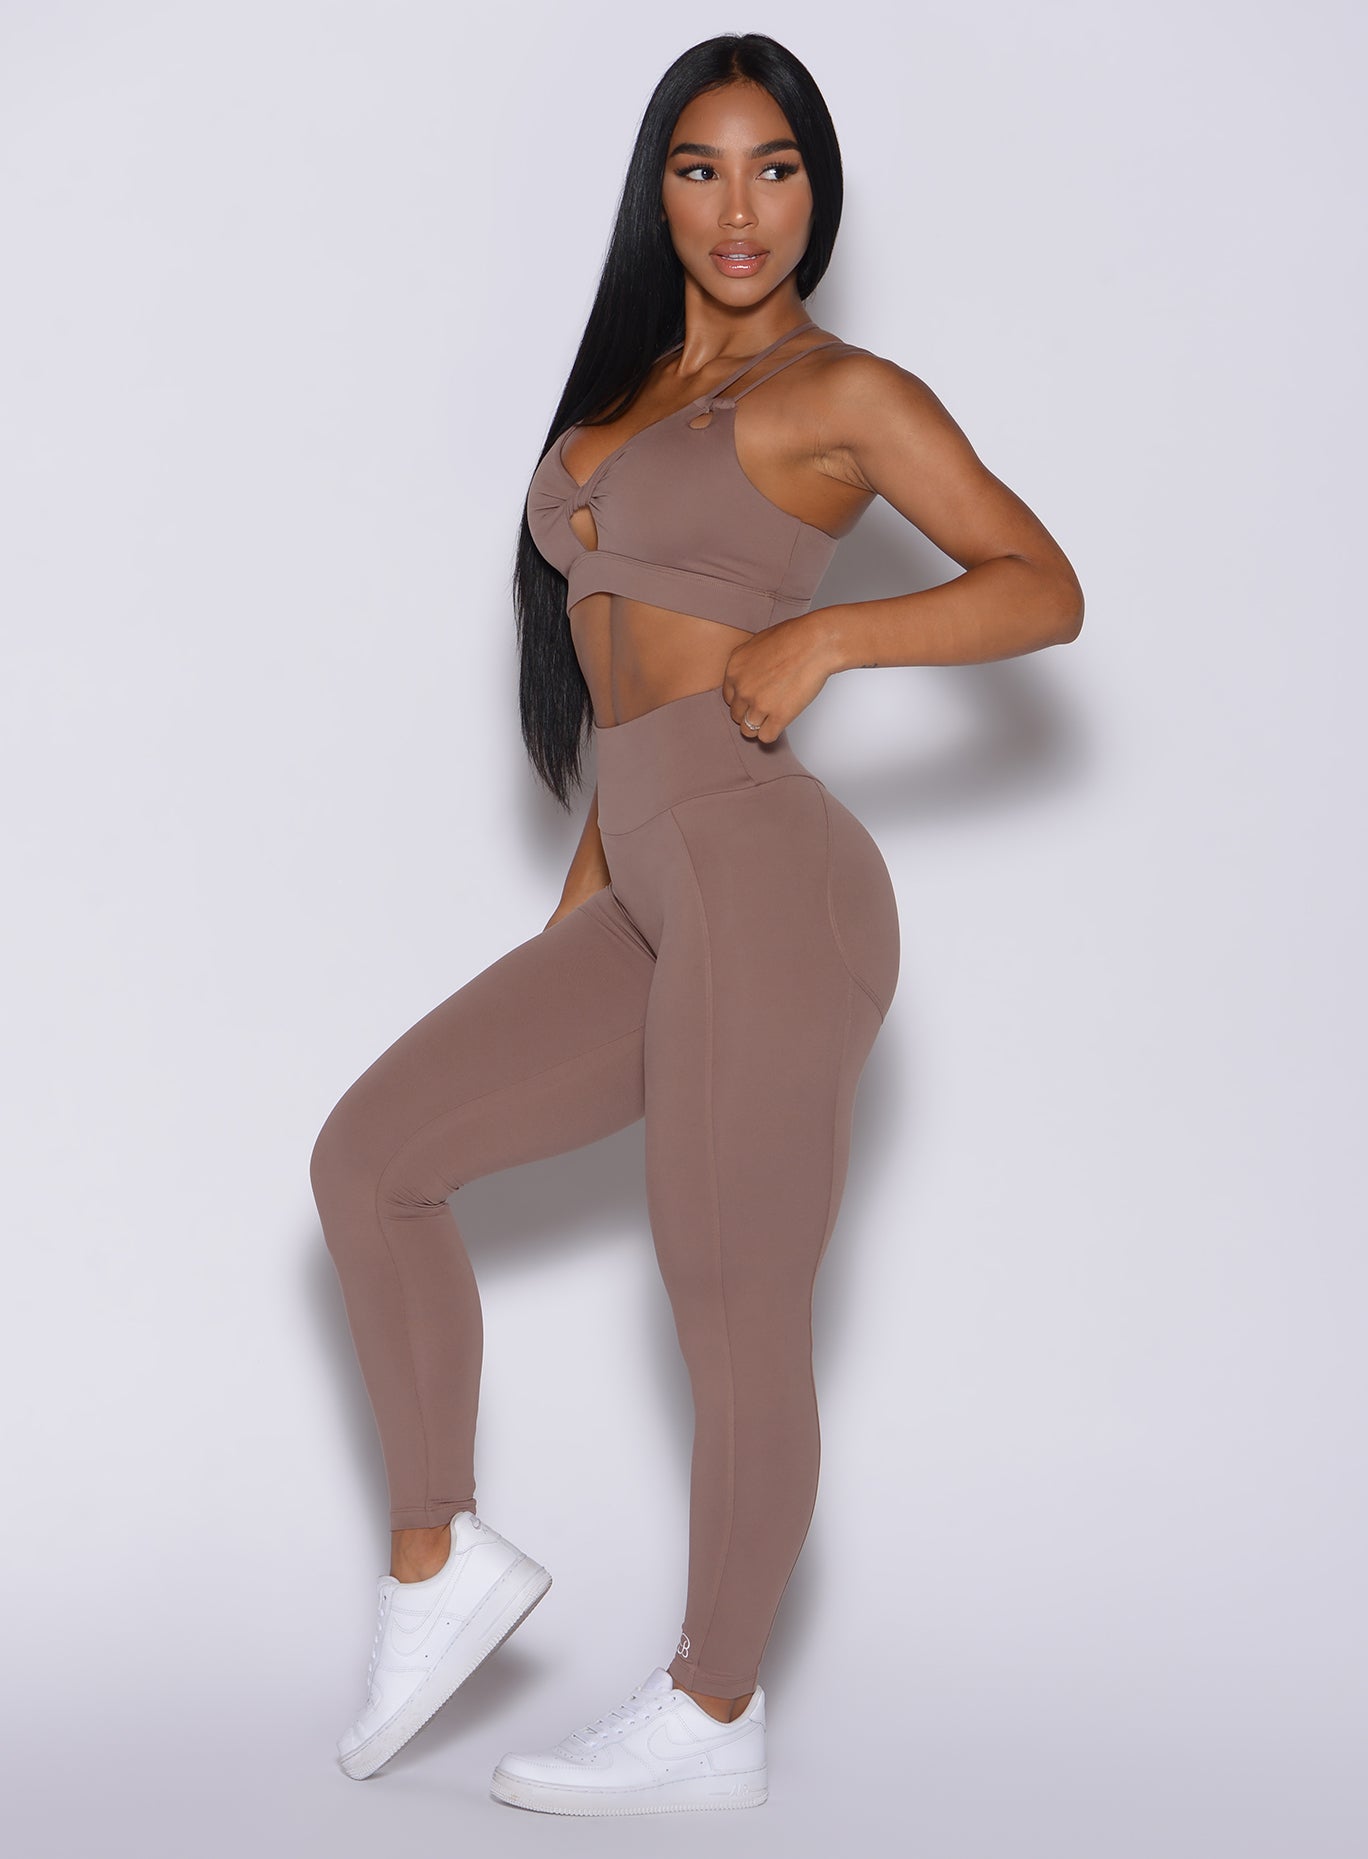 Left side profile view of a model angled slightly to her left wearing our new and enhanced shape leggings in tan color and a matching bra